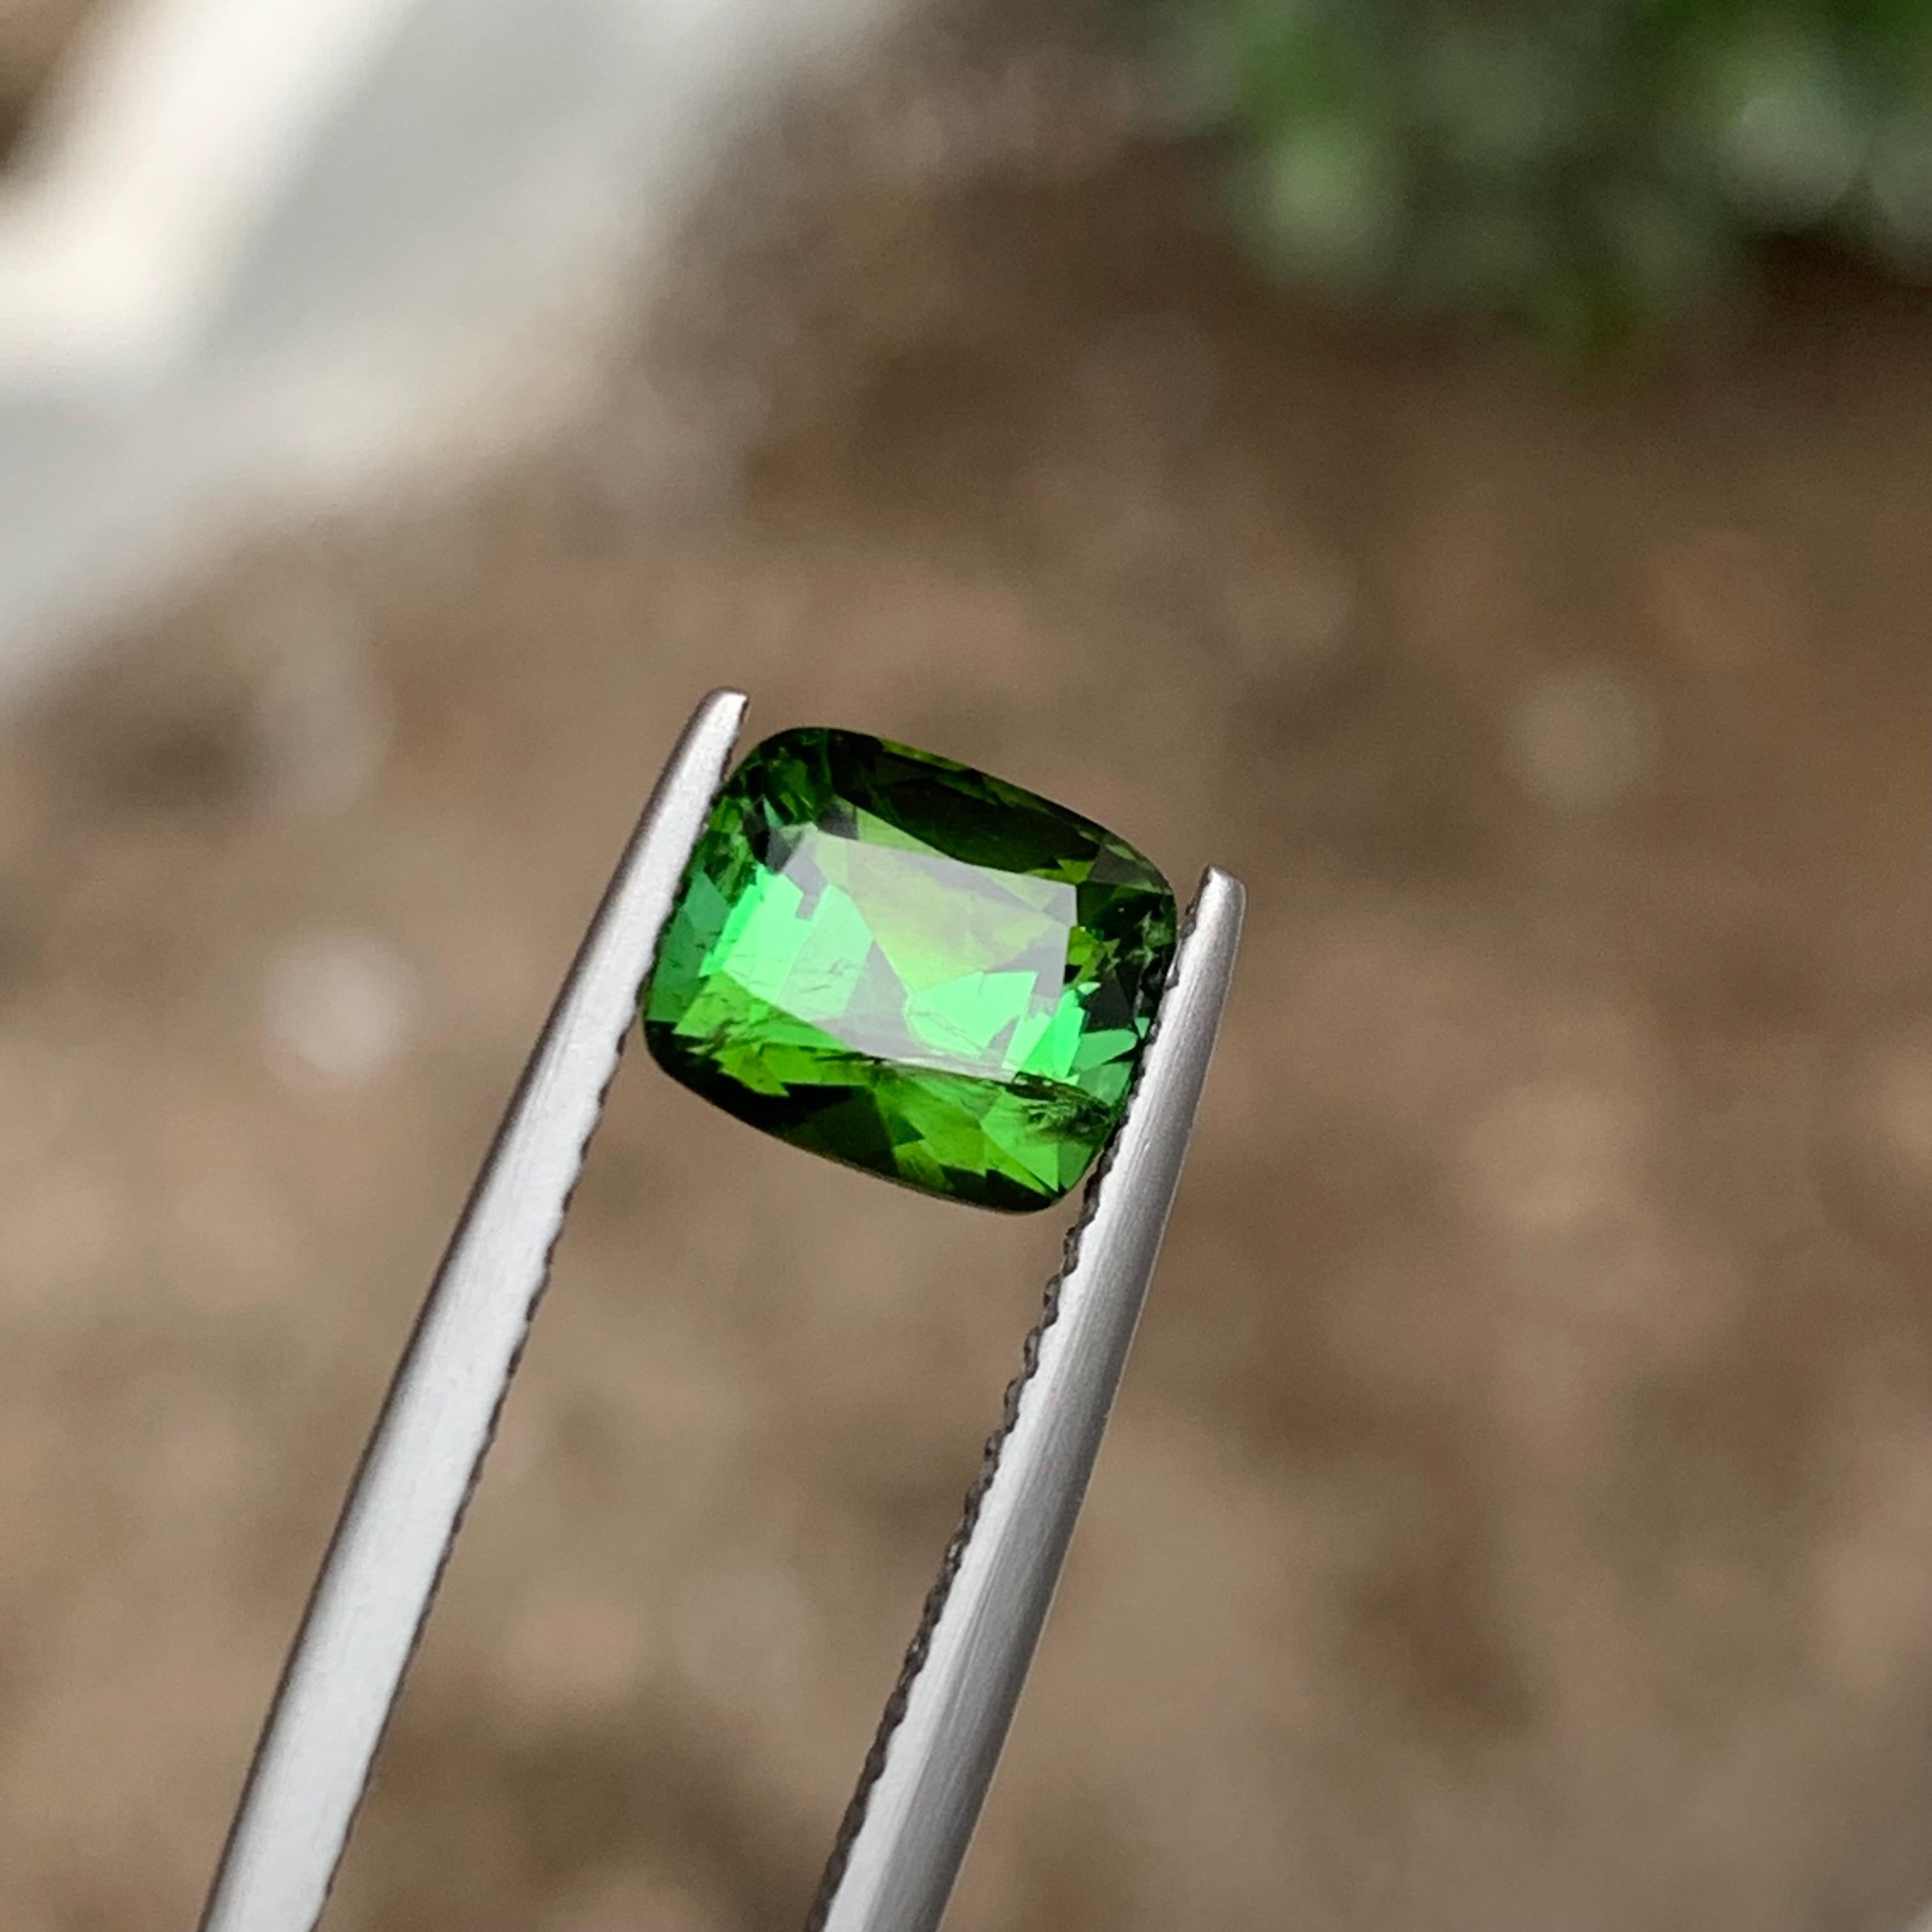 Rare Green Natural Tourmaline Loose Gemstone 2.10Ct Cushion Cut for Ring/Jewelry For Sale 5